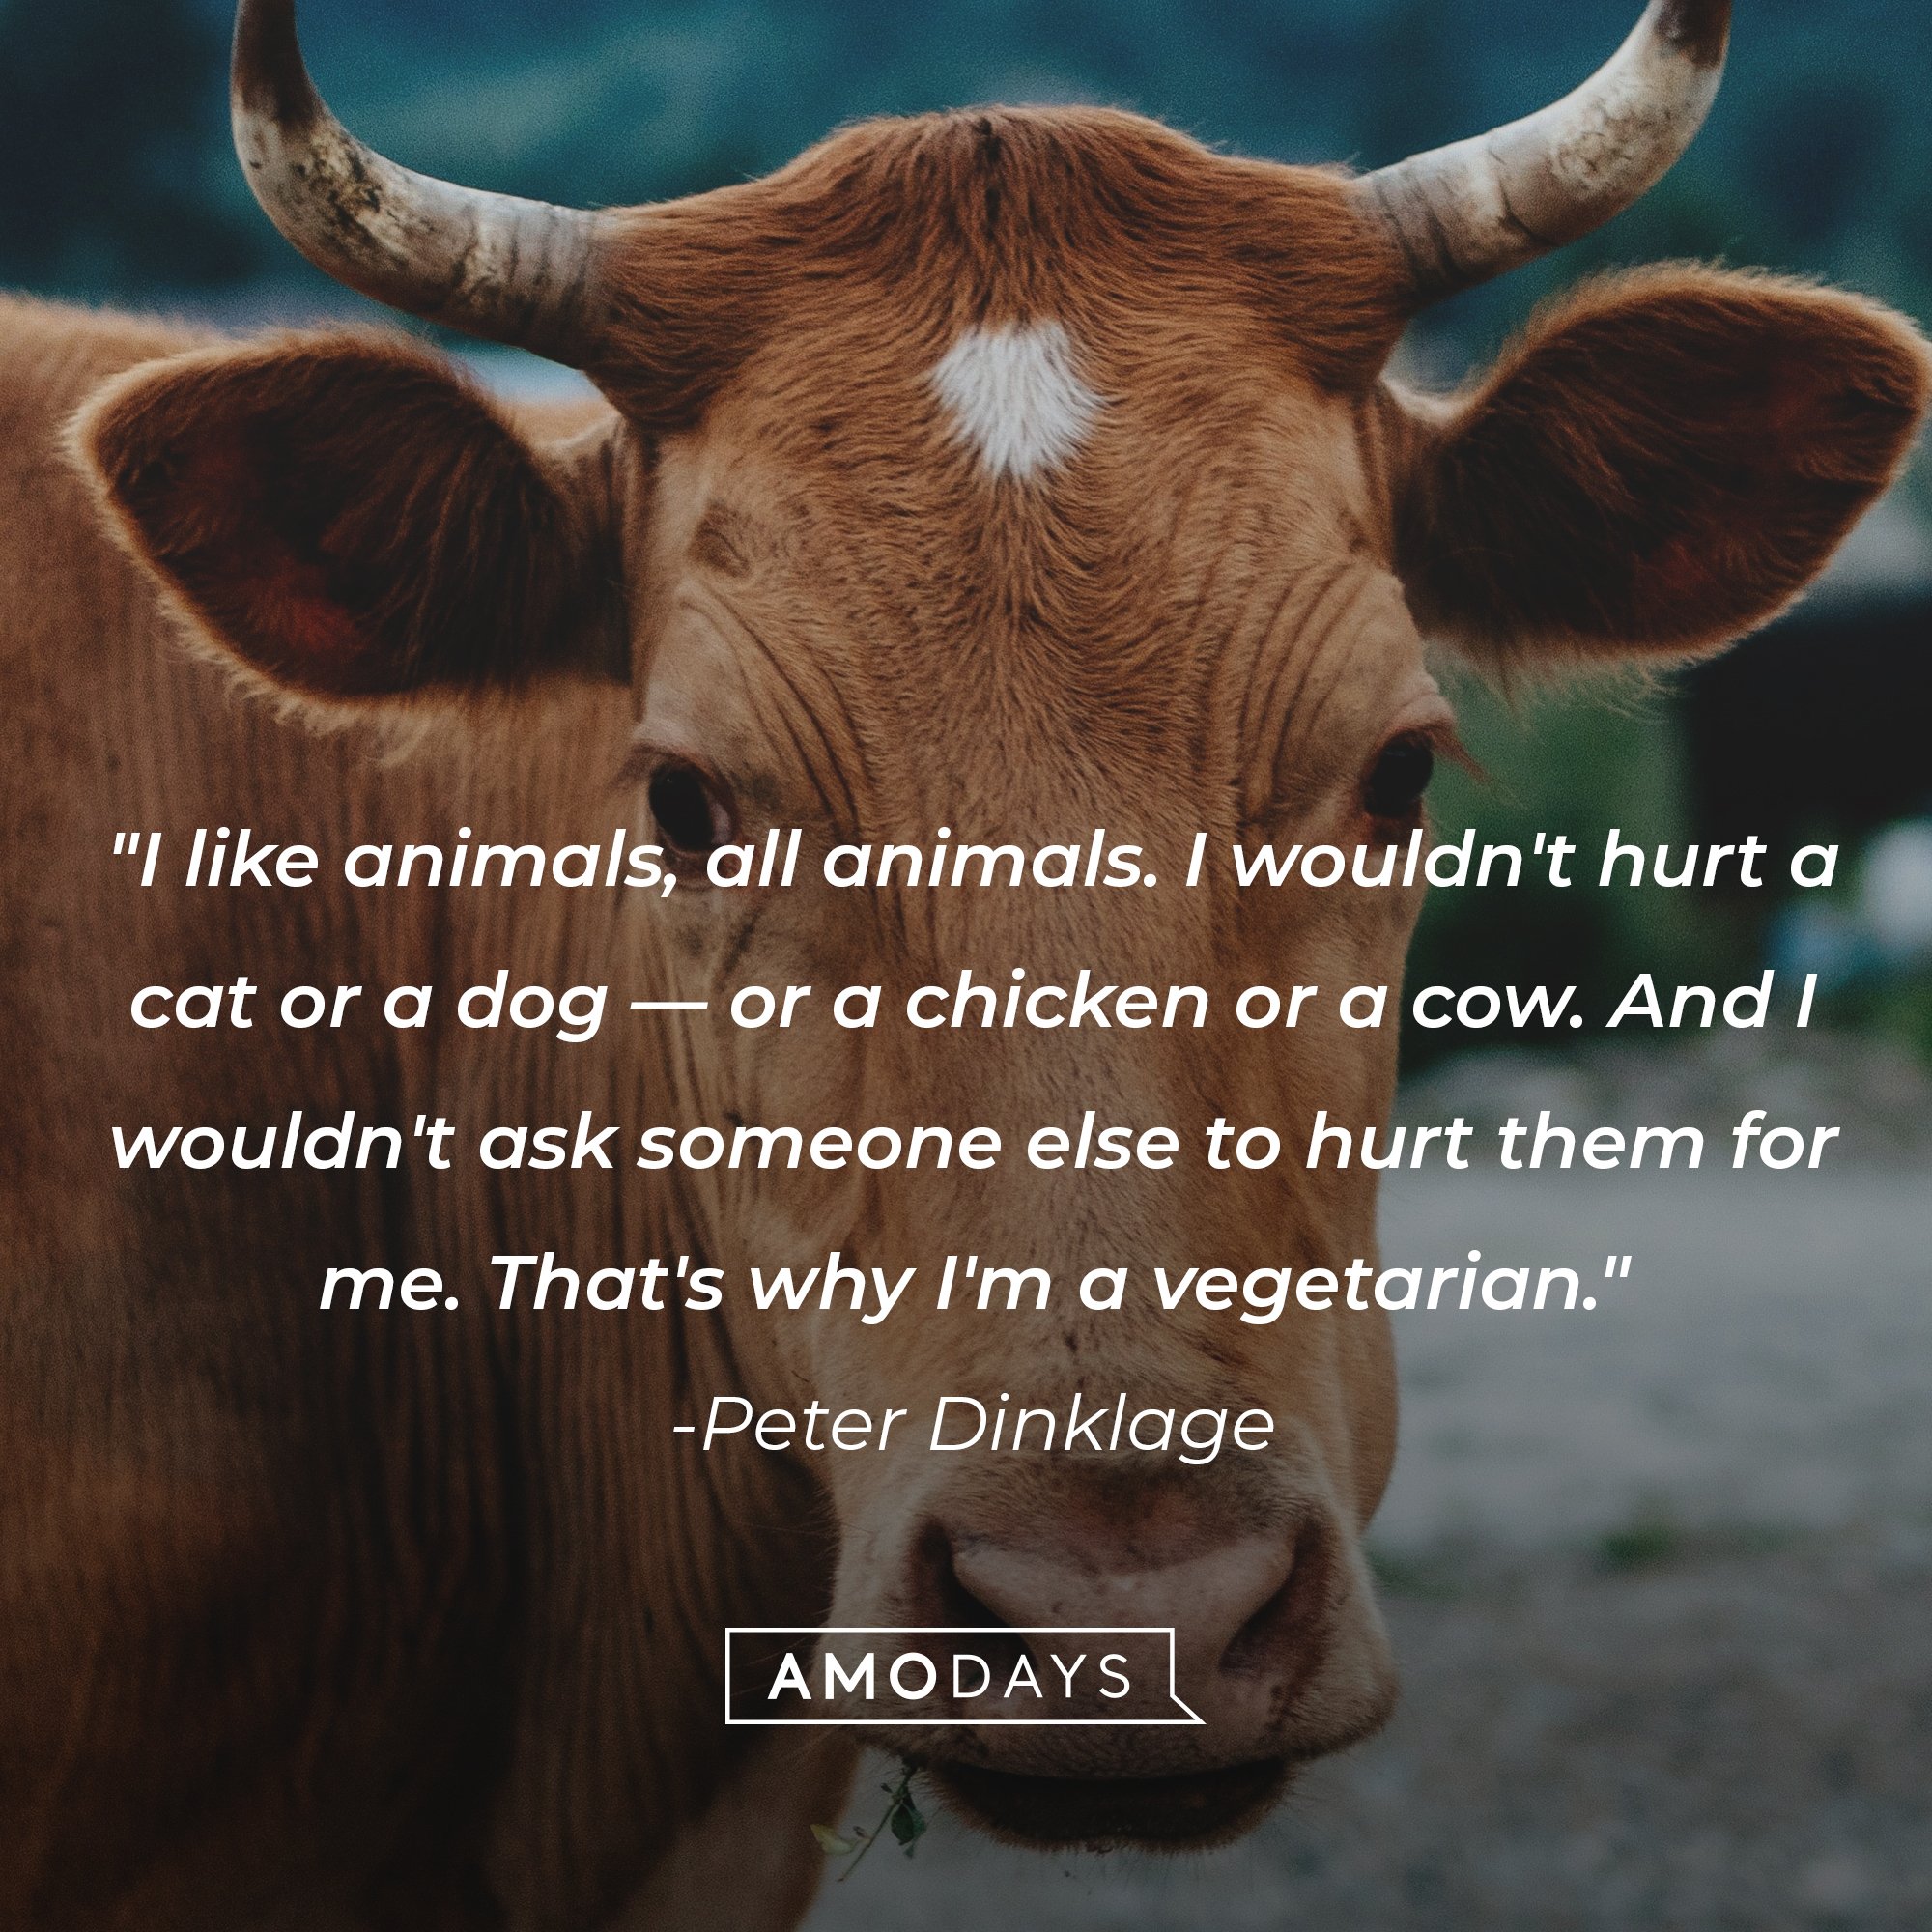    Peter Dinklage’s quote: "I like animals, all animals. I wouldn't hurt a cat or a dog—or a chicken or a cow. And I wouldn't ask someone else to hurt them for me. That's why I'm a vegetarian." | Image: AmoDays